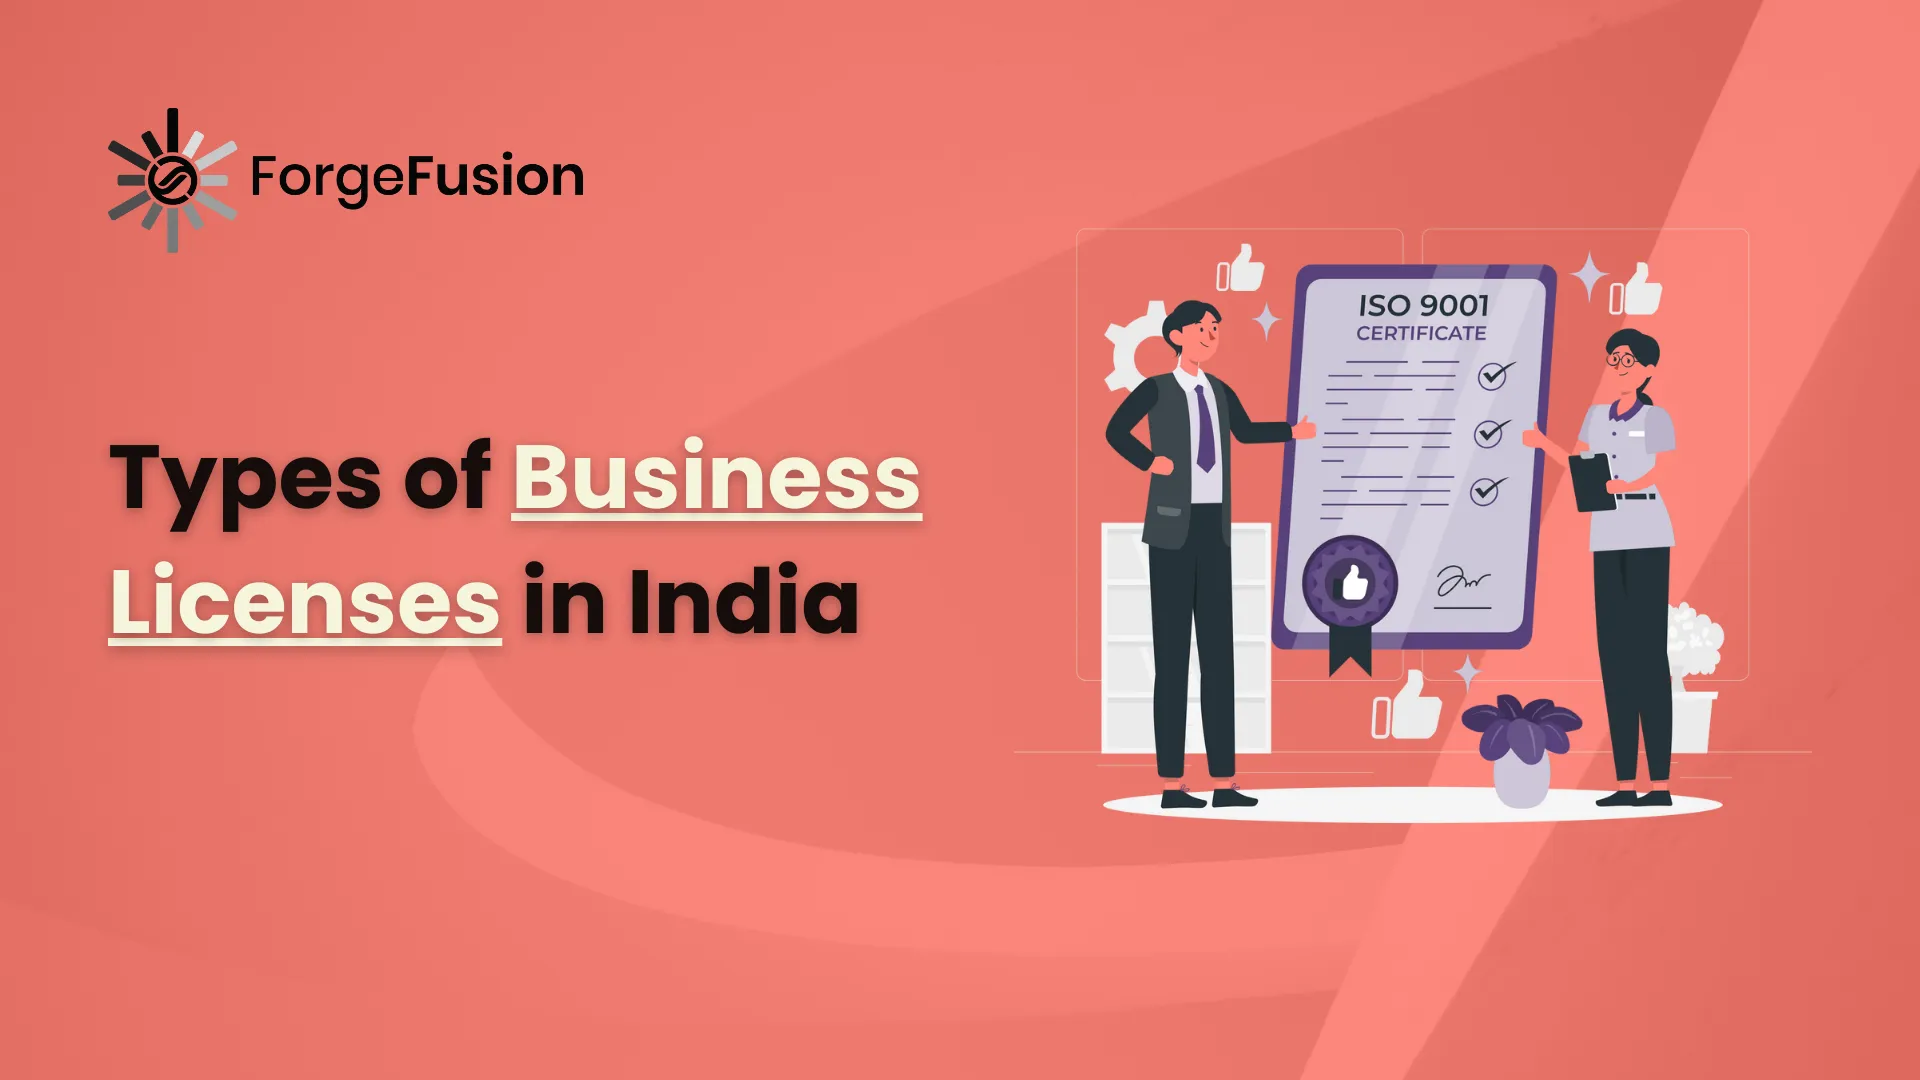 Different Types of Business Licenses in India